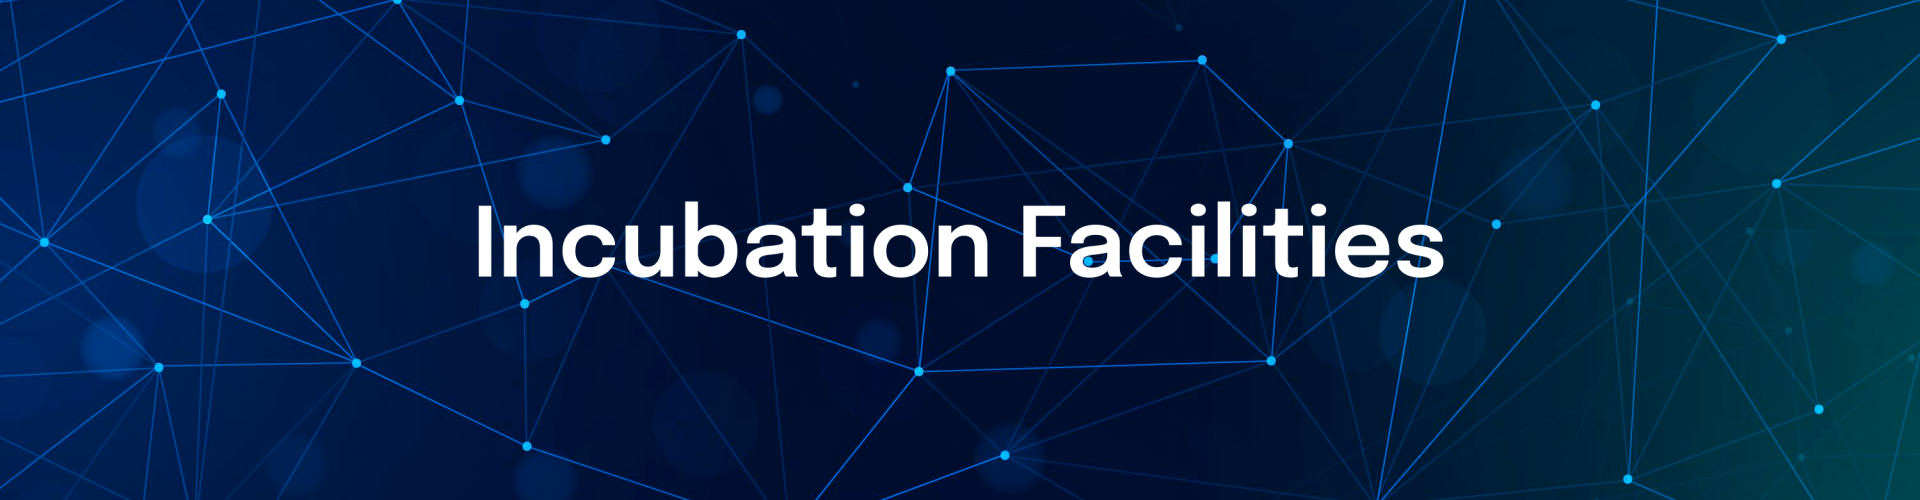 incubation page banner